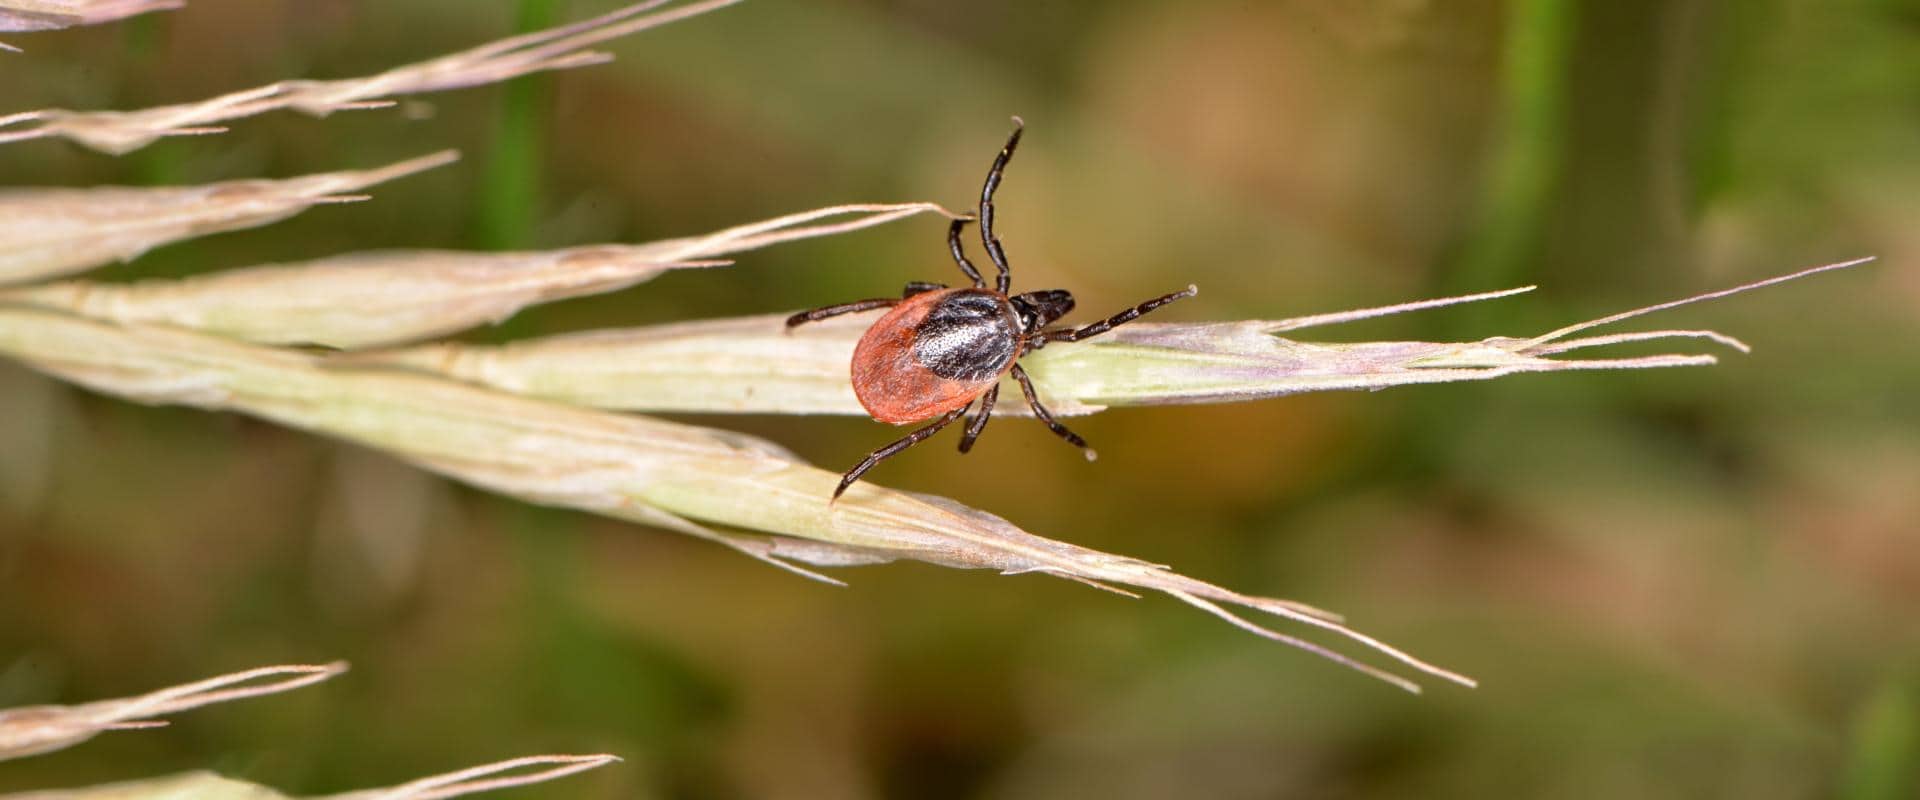 tick waiting for host in central washington